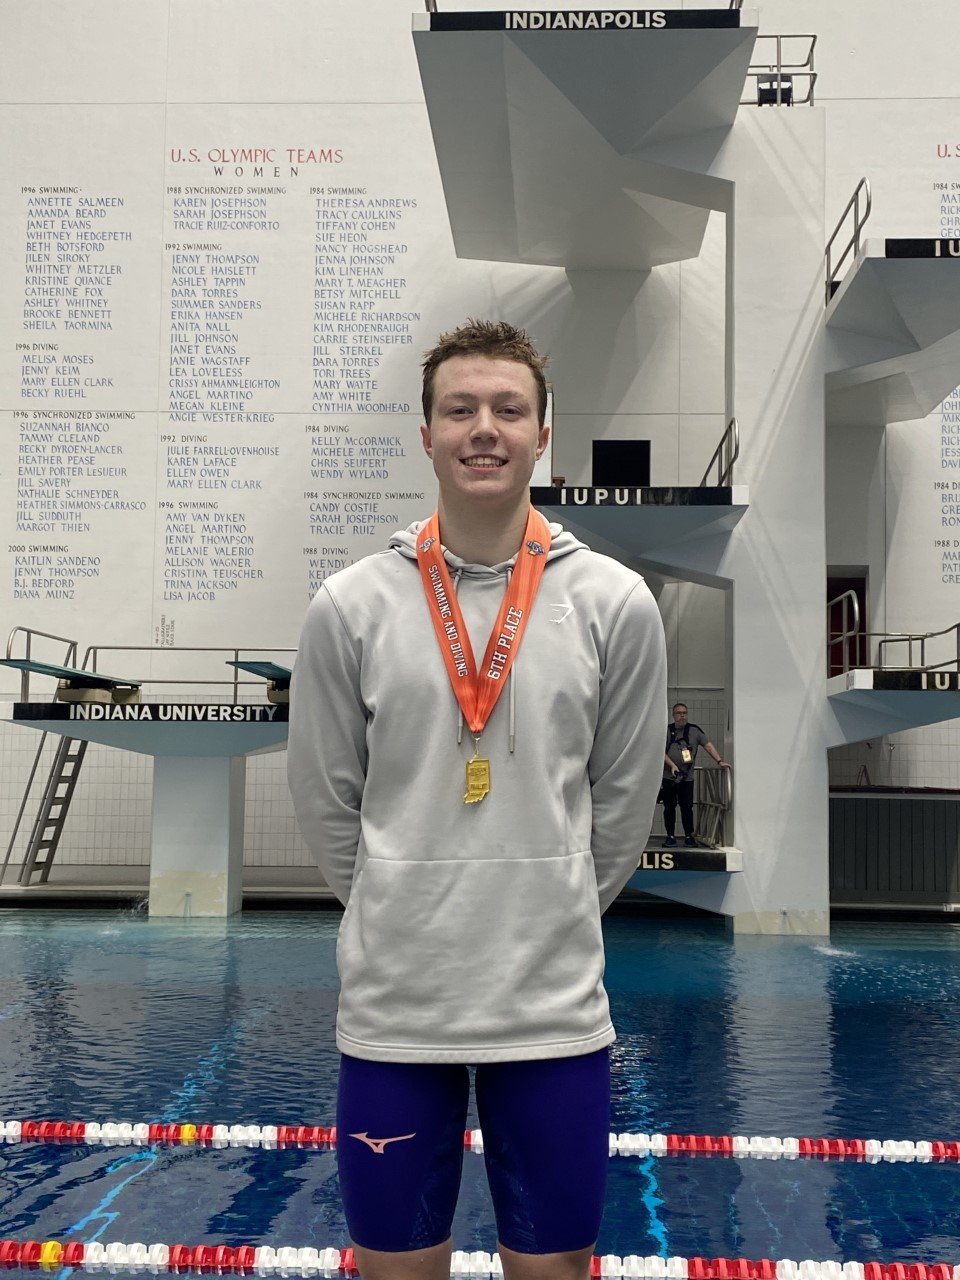 Crawfordsville’s Whitman Horton stands on the podium for his 6th place finish in the 100 backstroke at the IHSAA Boys Swim State Finals. It’s the 1st time since 2007 (excluding diving) that a CHS swimmer has stood on the podium.